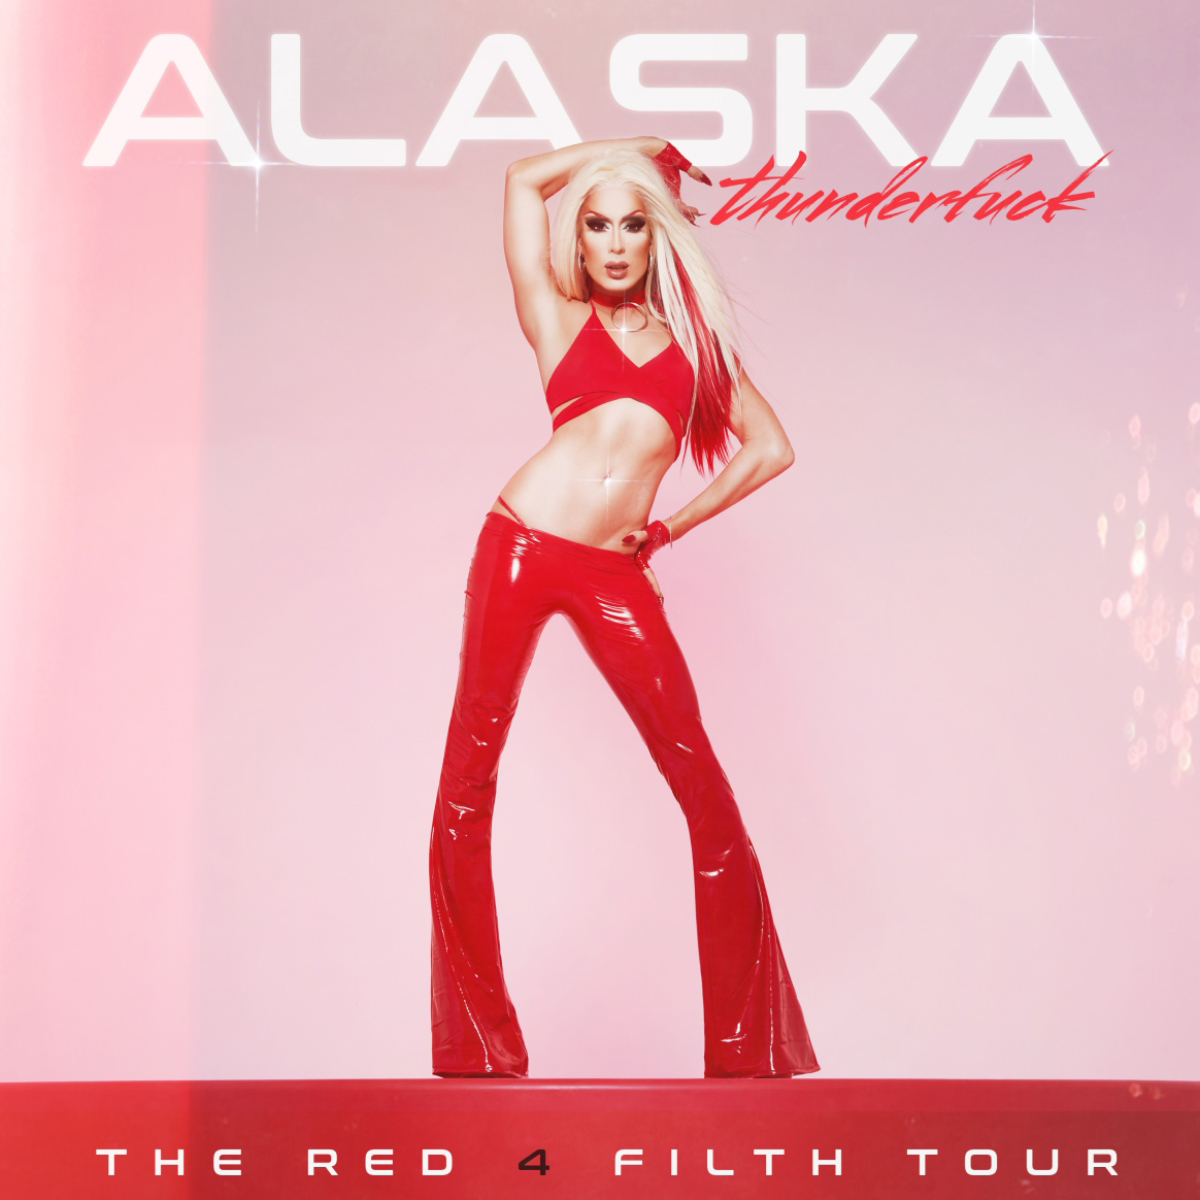 ALASKA presents The Red 4 Fifth Tour (18+)